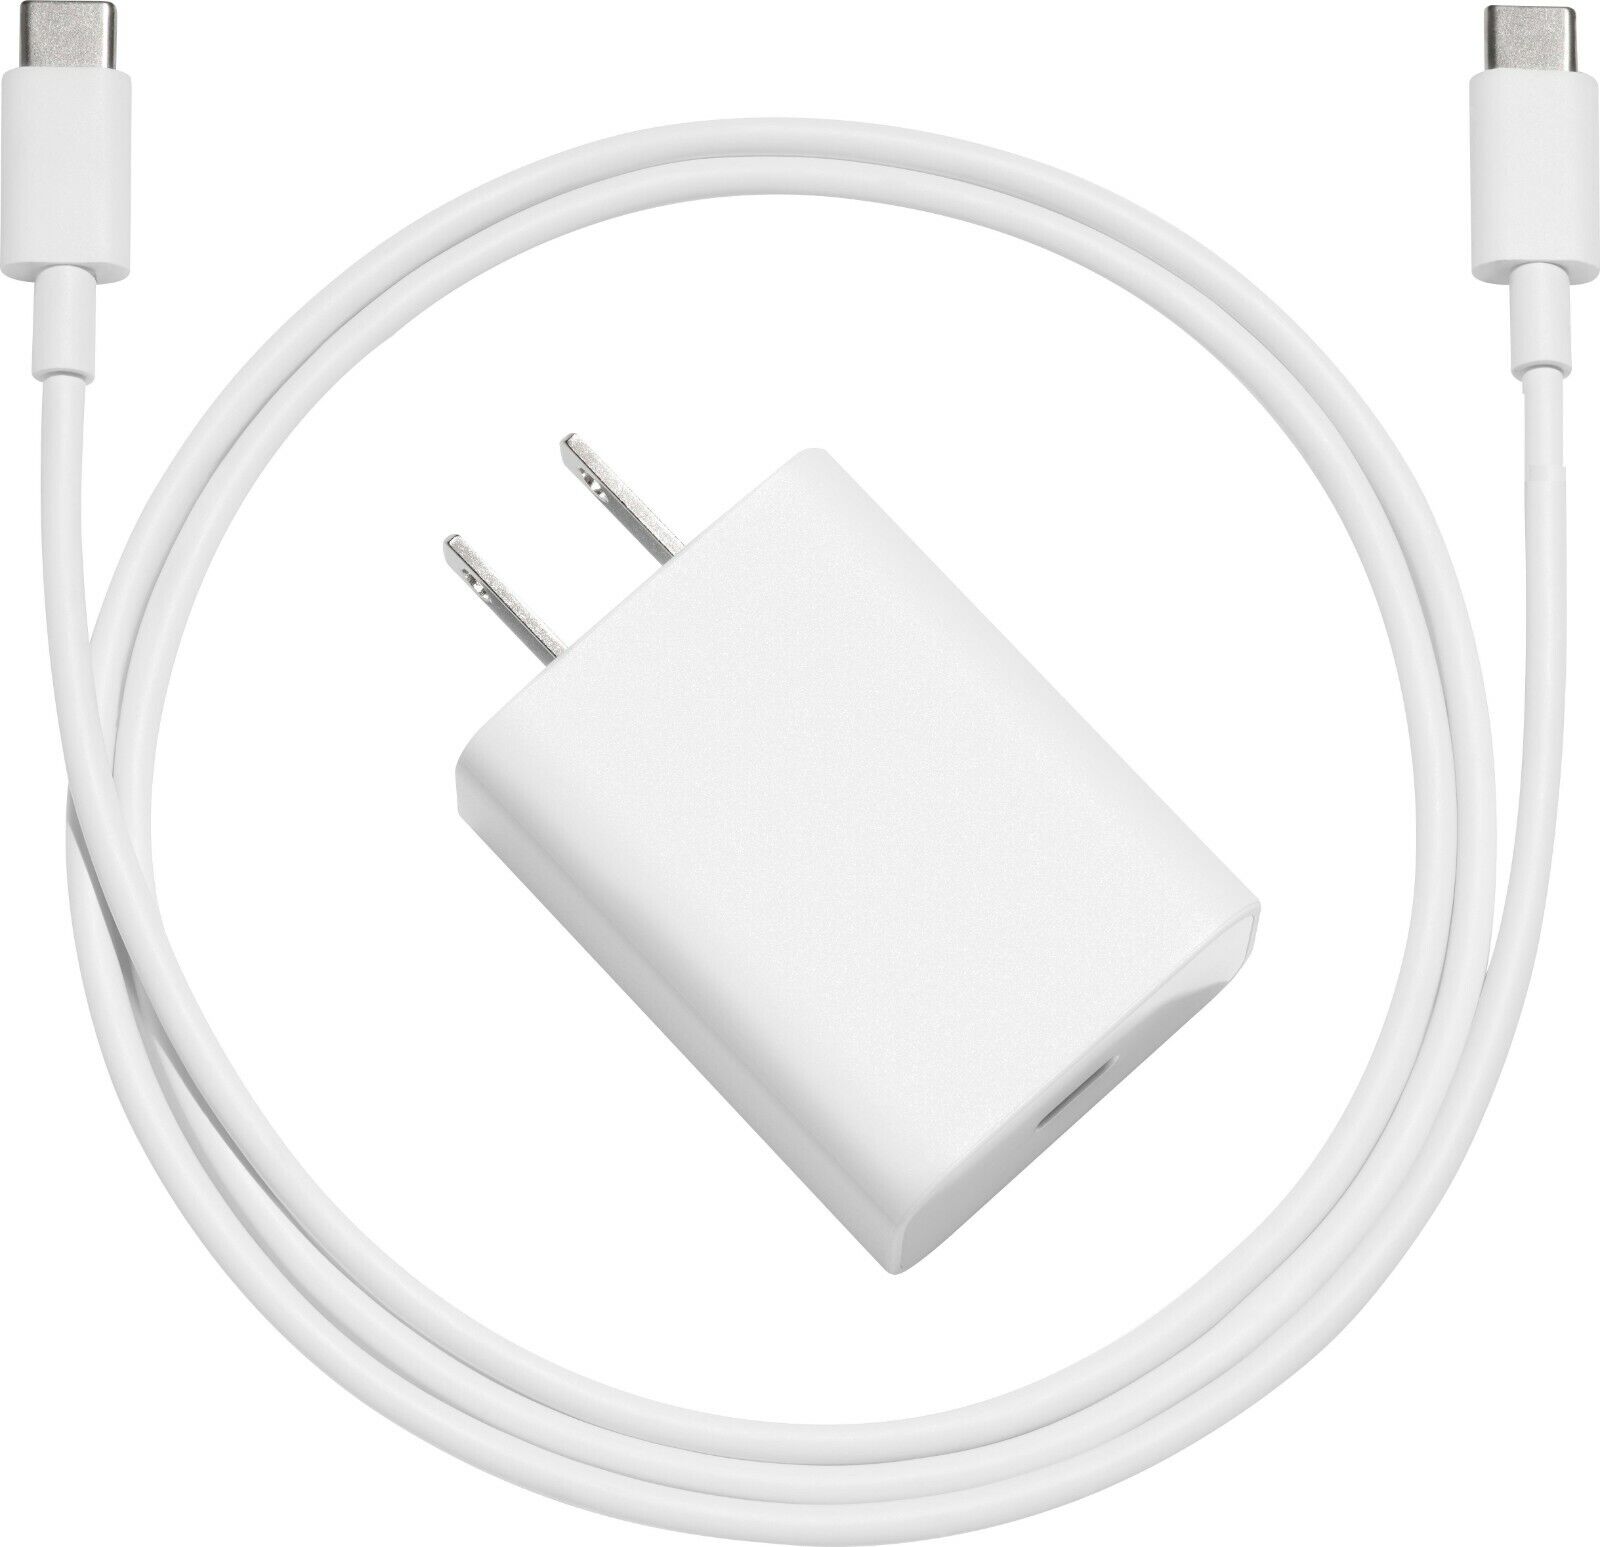 GOOGLE 18W FAST USB-C POWER ADAPTER PLUS 3FT TYPE C CABLE - GA00193-US - GENUINE Compatible Brand: For Apple, For Go